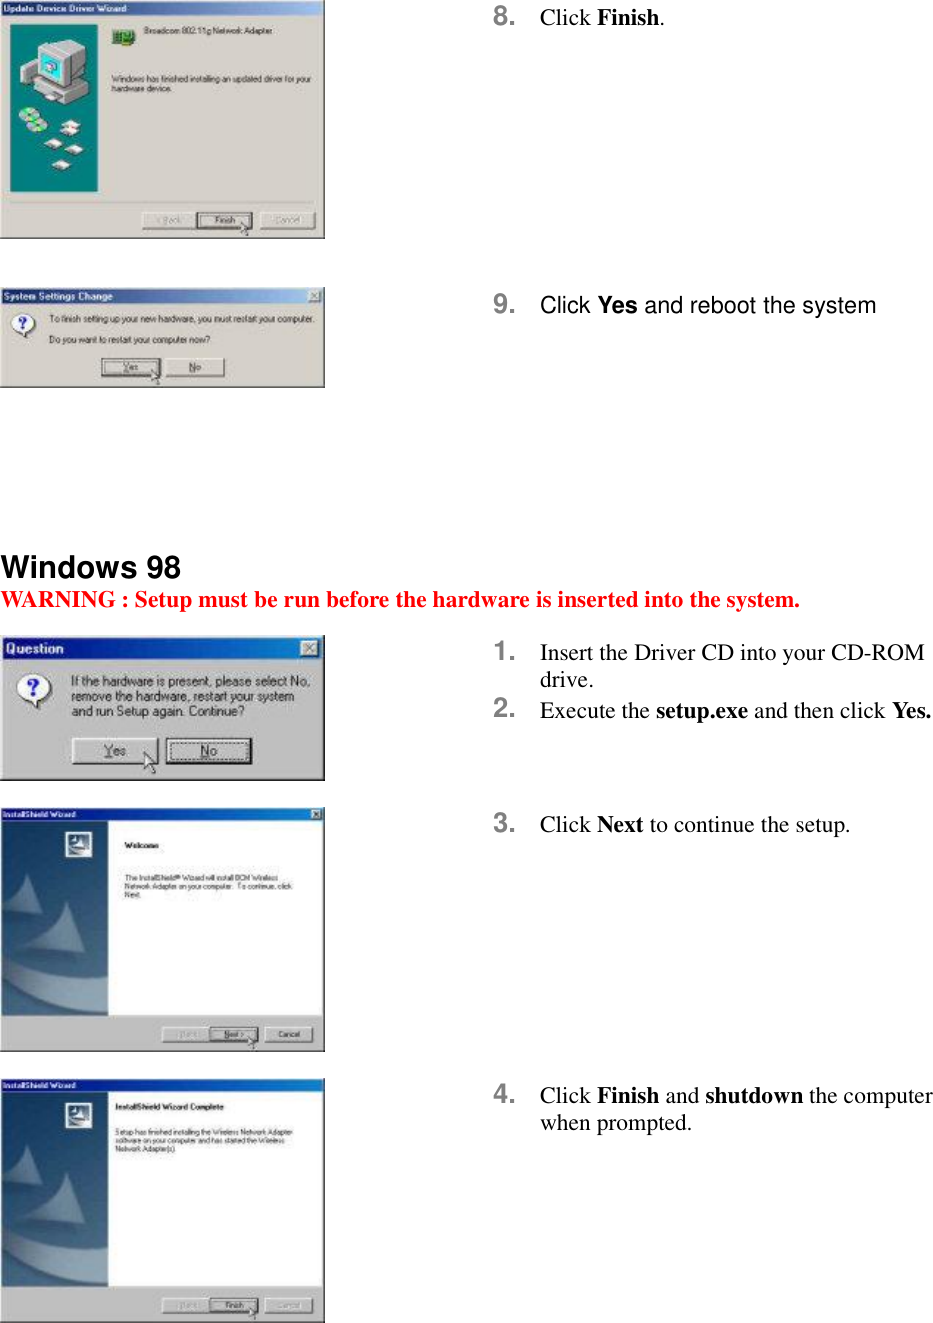  8.  Click Finish.   9.  Click Yes and reboot the system      Windows 98 WARNING : Setup must be run before the hardware is inserted into the system.   1.  Insert the Driver CD into your CD-ROM drive. 2.  Execute the setup.exe and then click Yes.   3.  Click Next to continue the setup.   4.  Click Finish and shutdown the computer when prompted.  